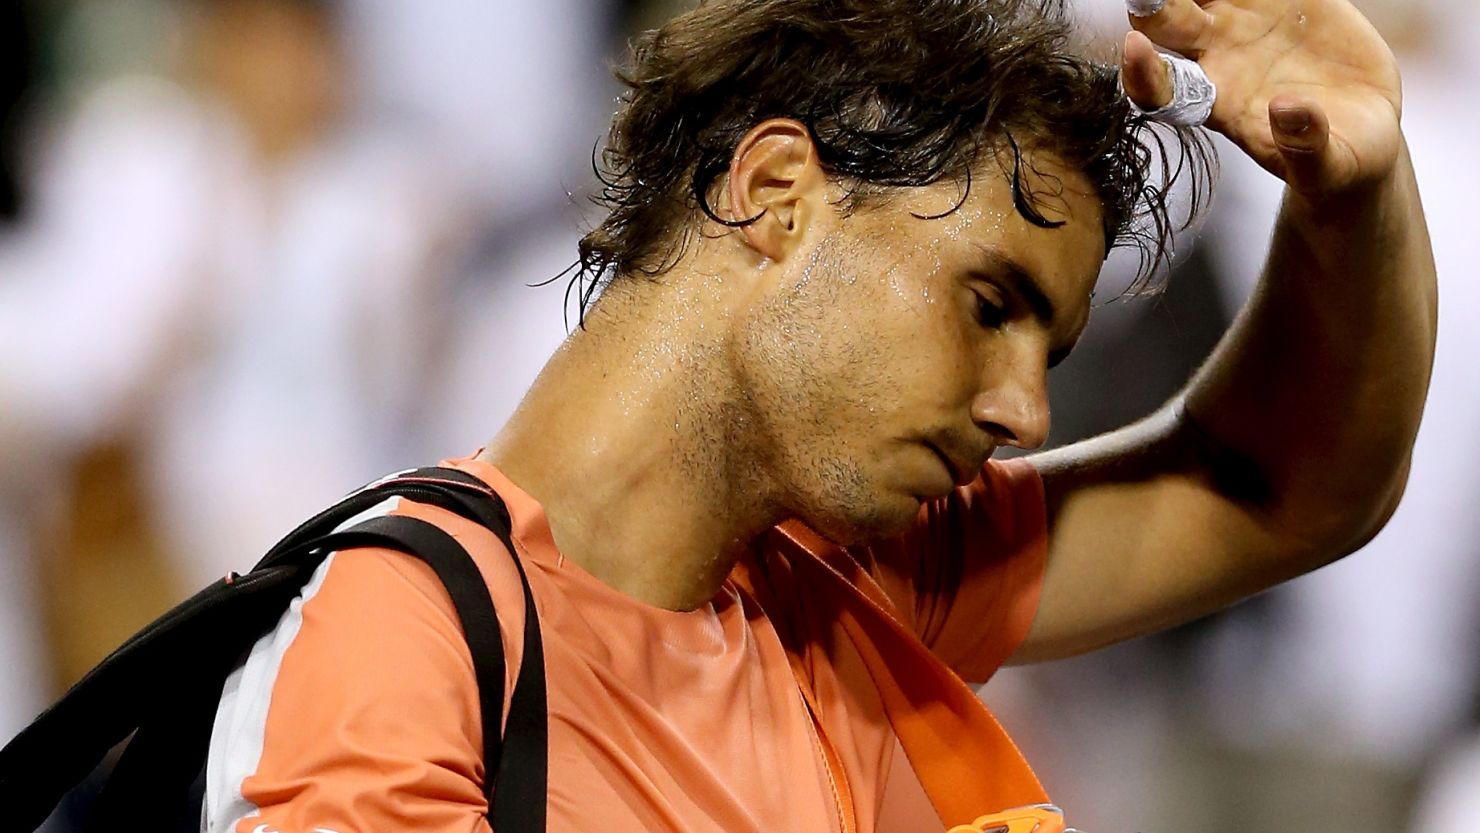 World No. 1 Rafael Nadal was looking to win his fourth singles title at the Indian Wells Masters.